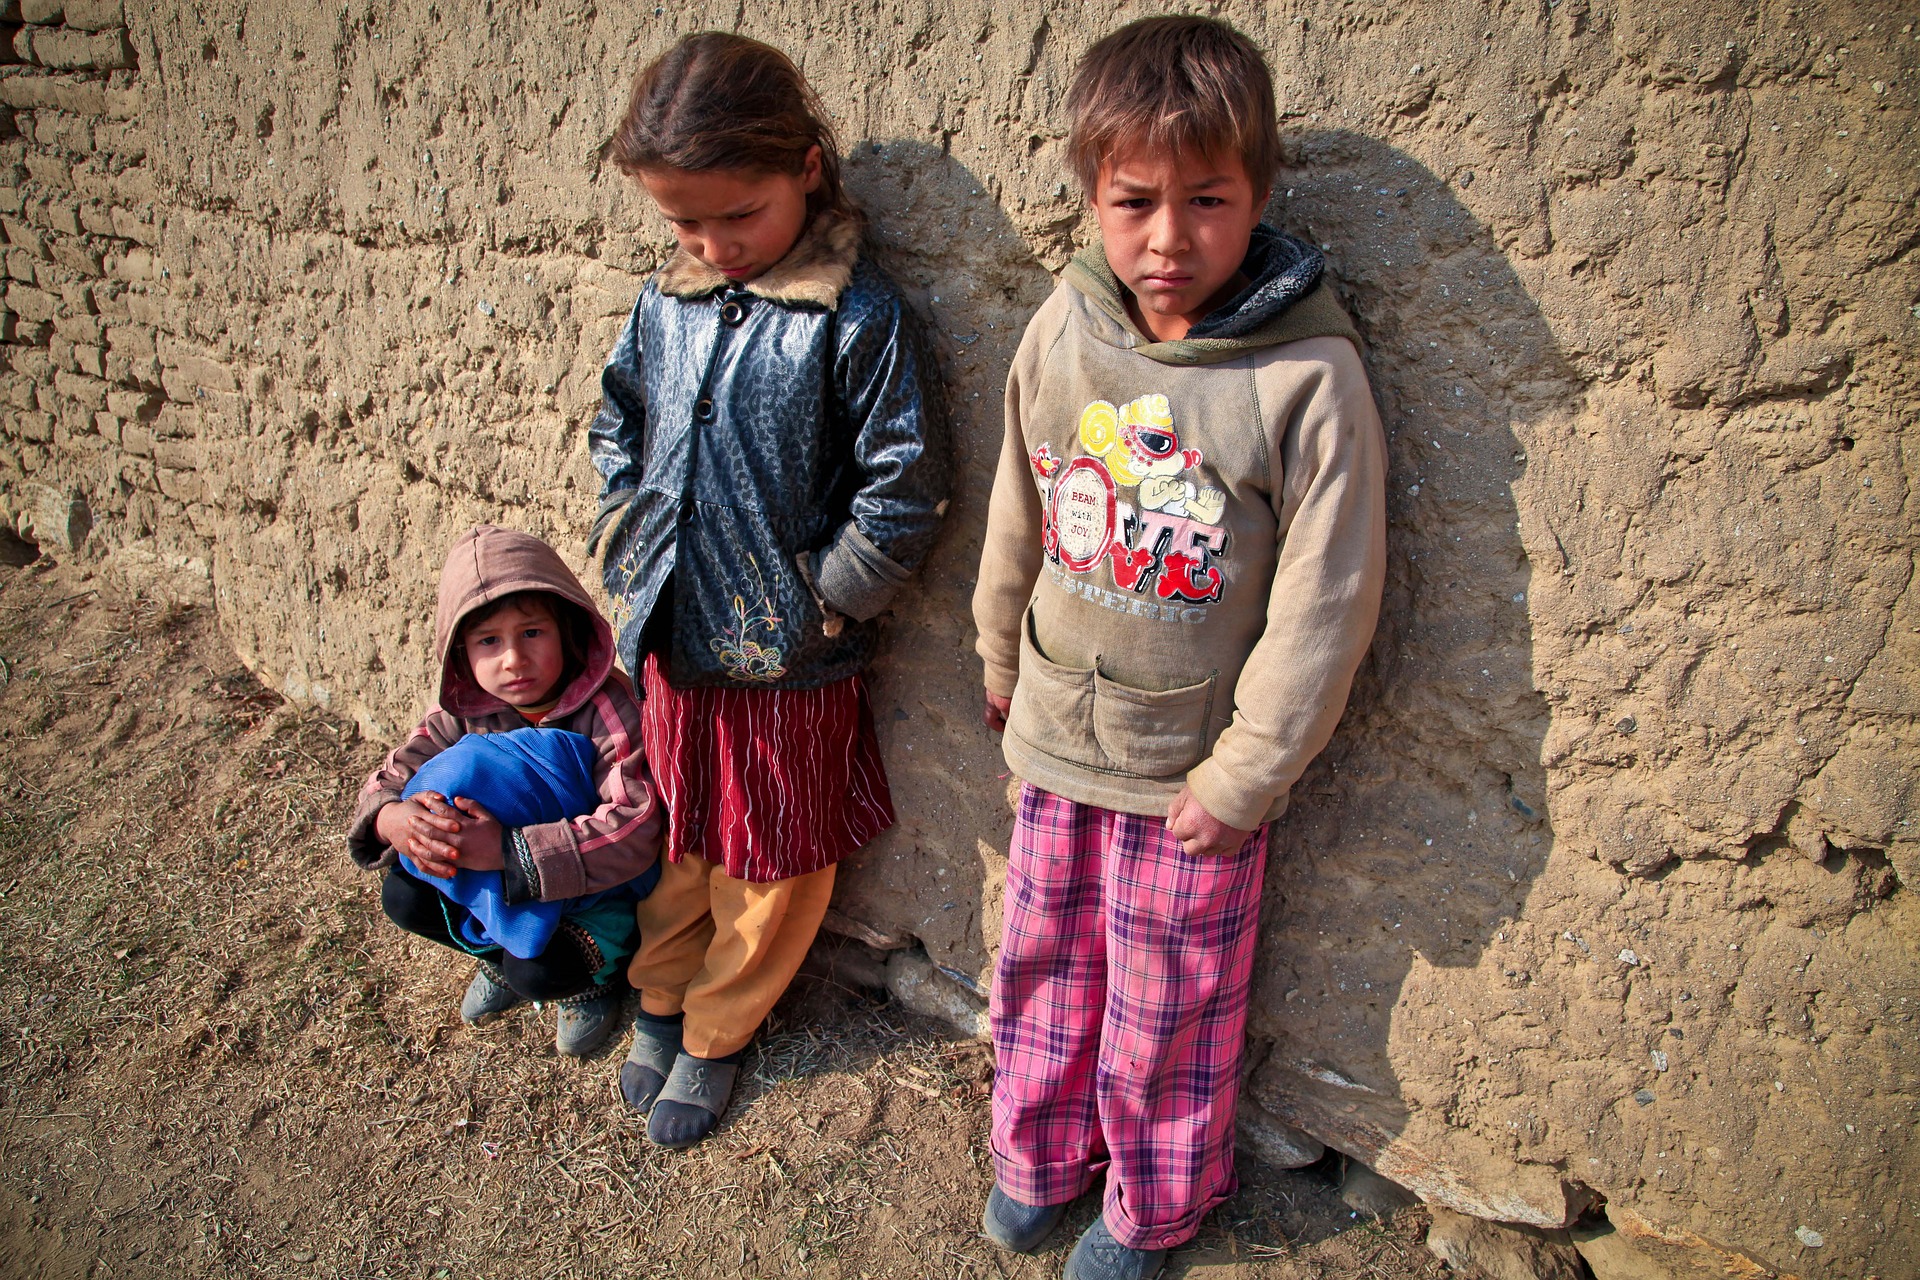 Afghani children with their backs against the wall.